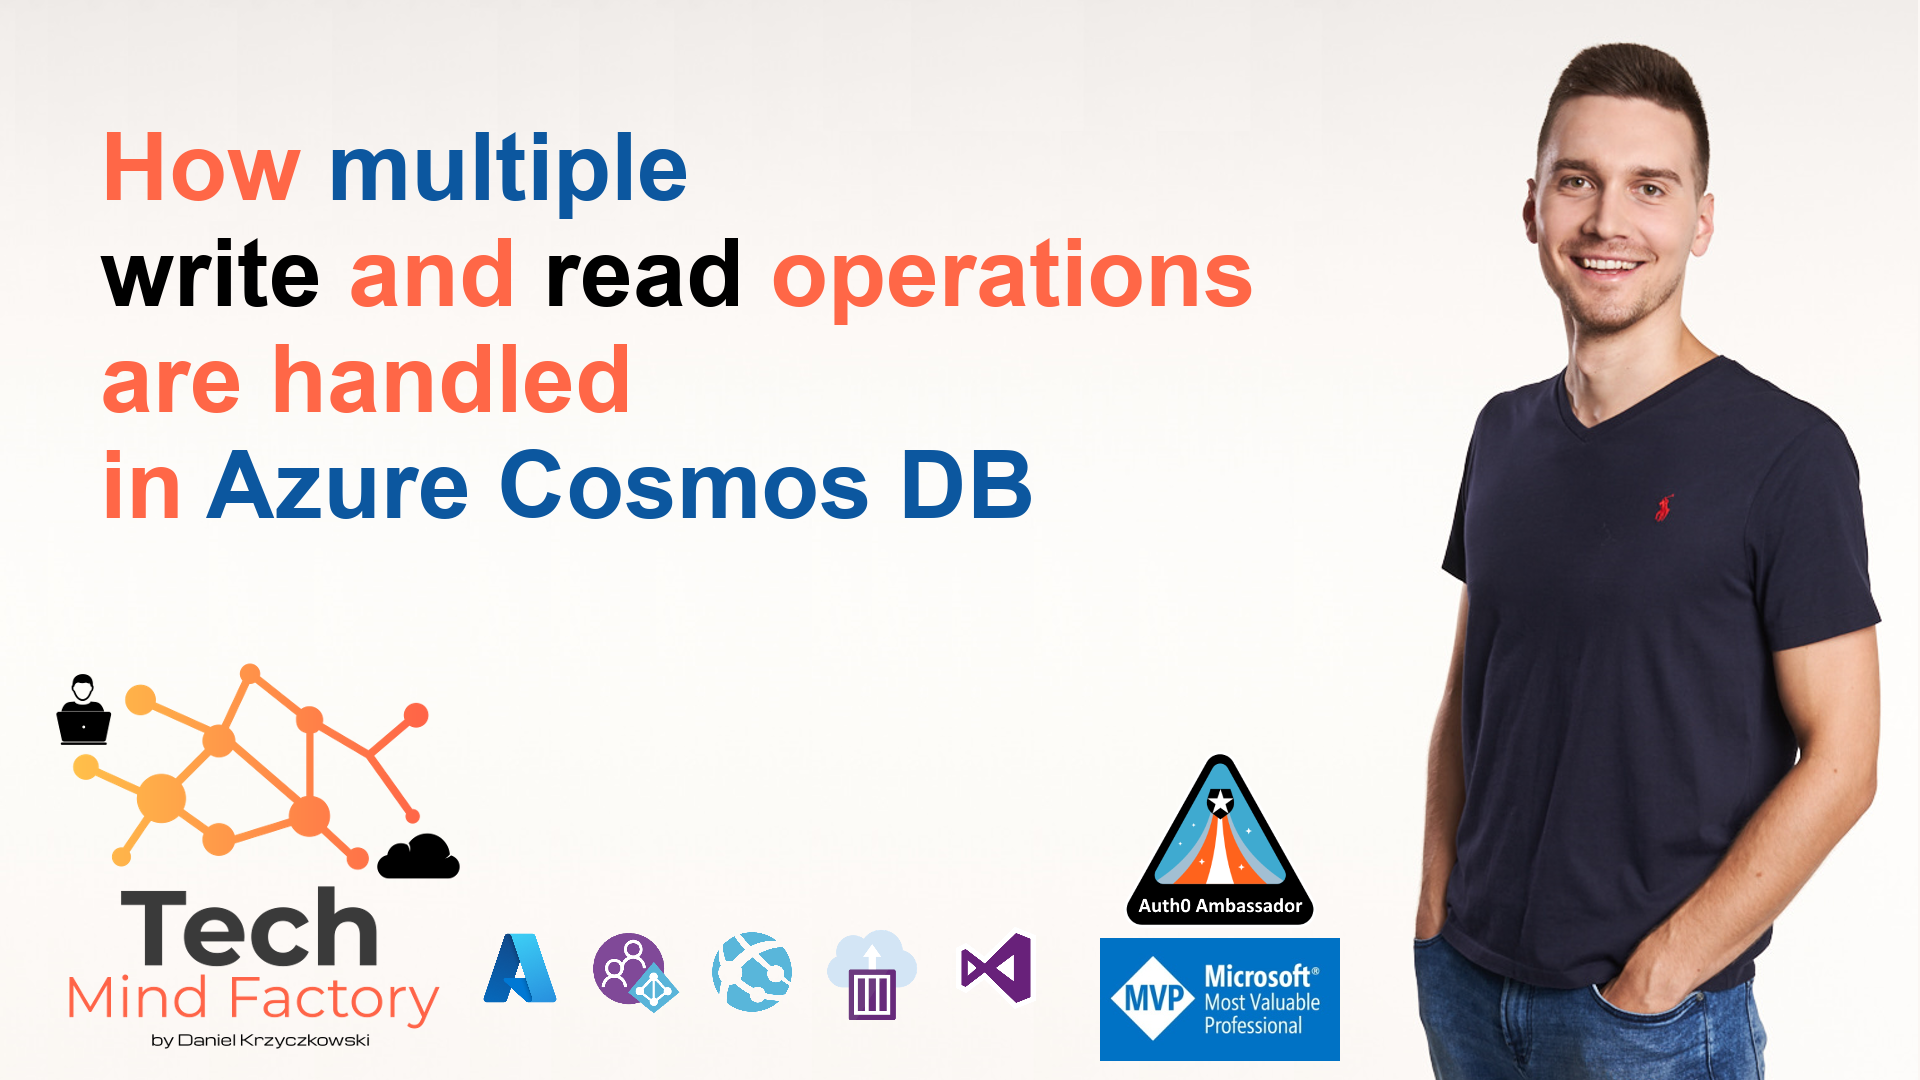 How to handle multiple writes and reads in Azure Cosmos DB